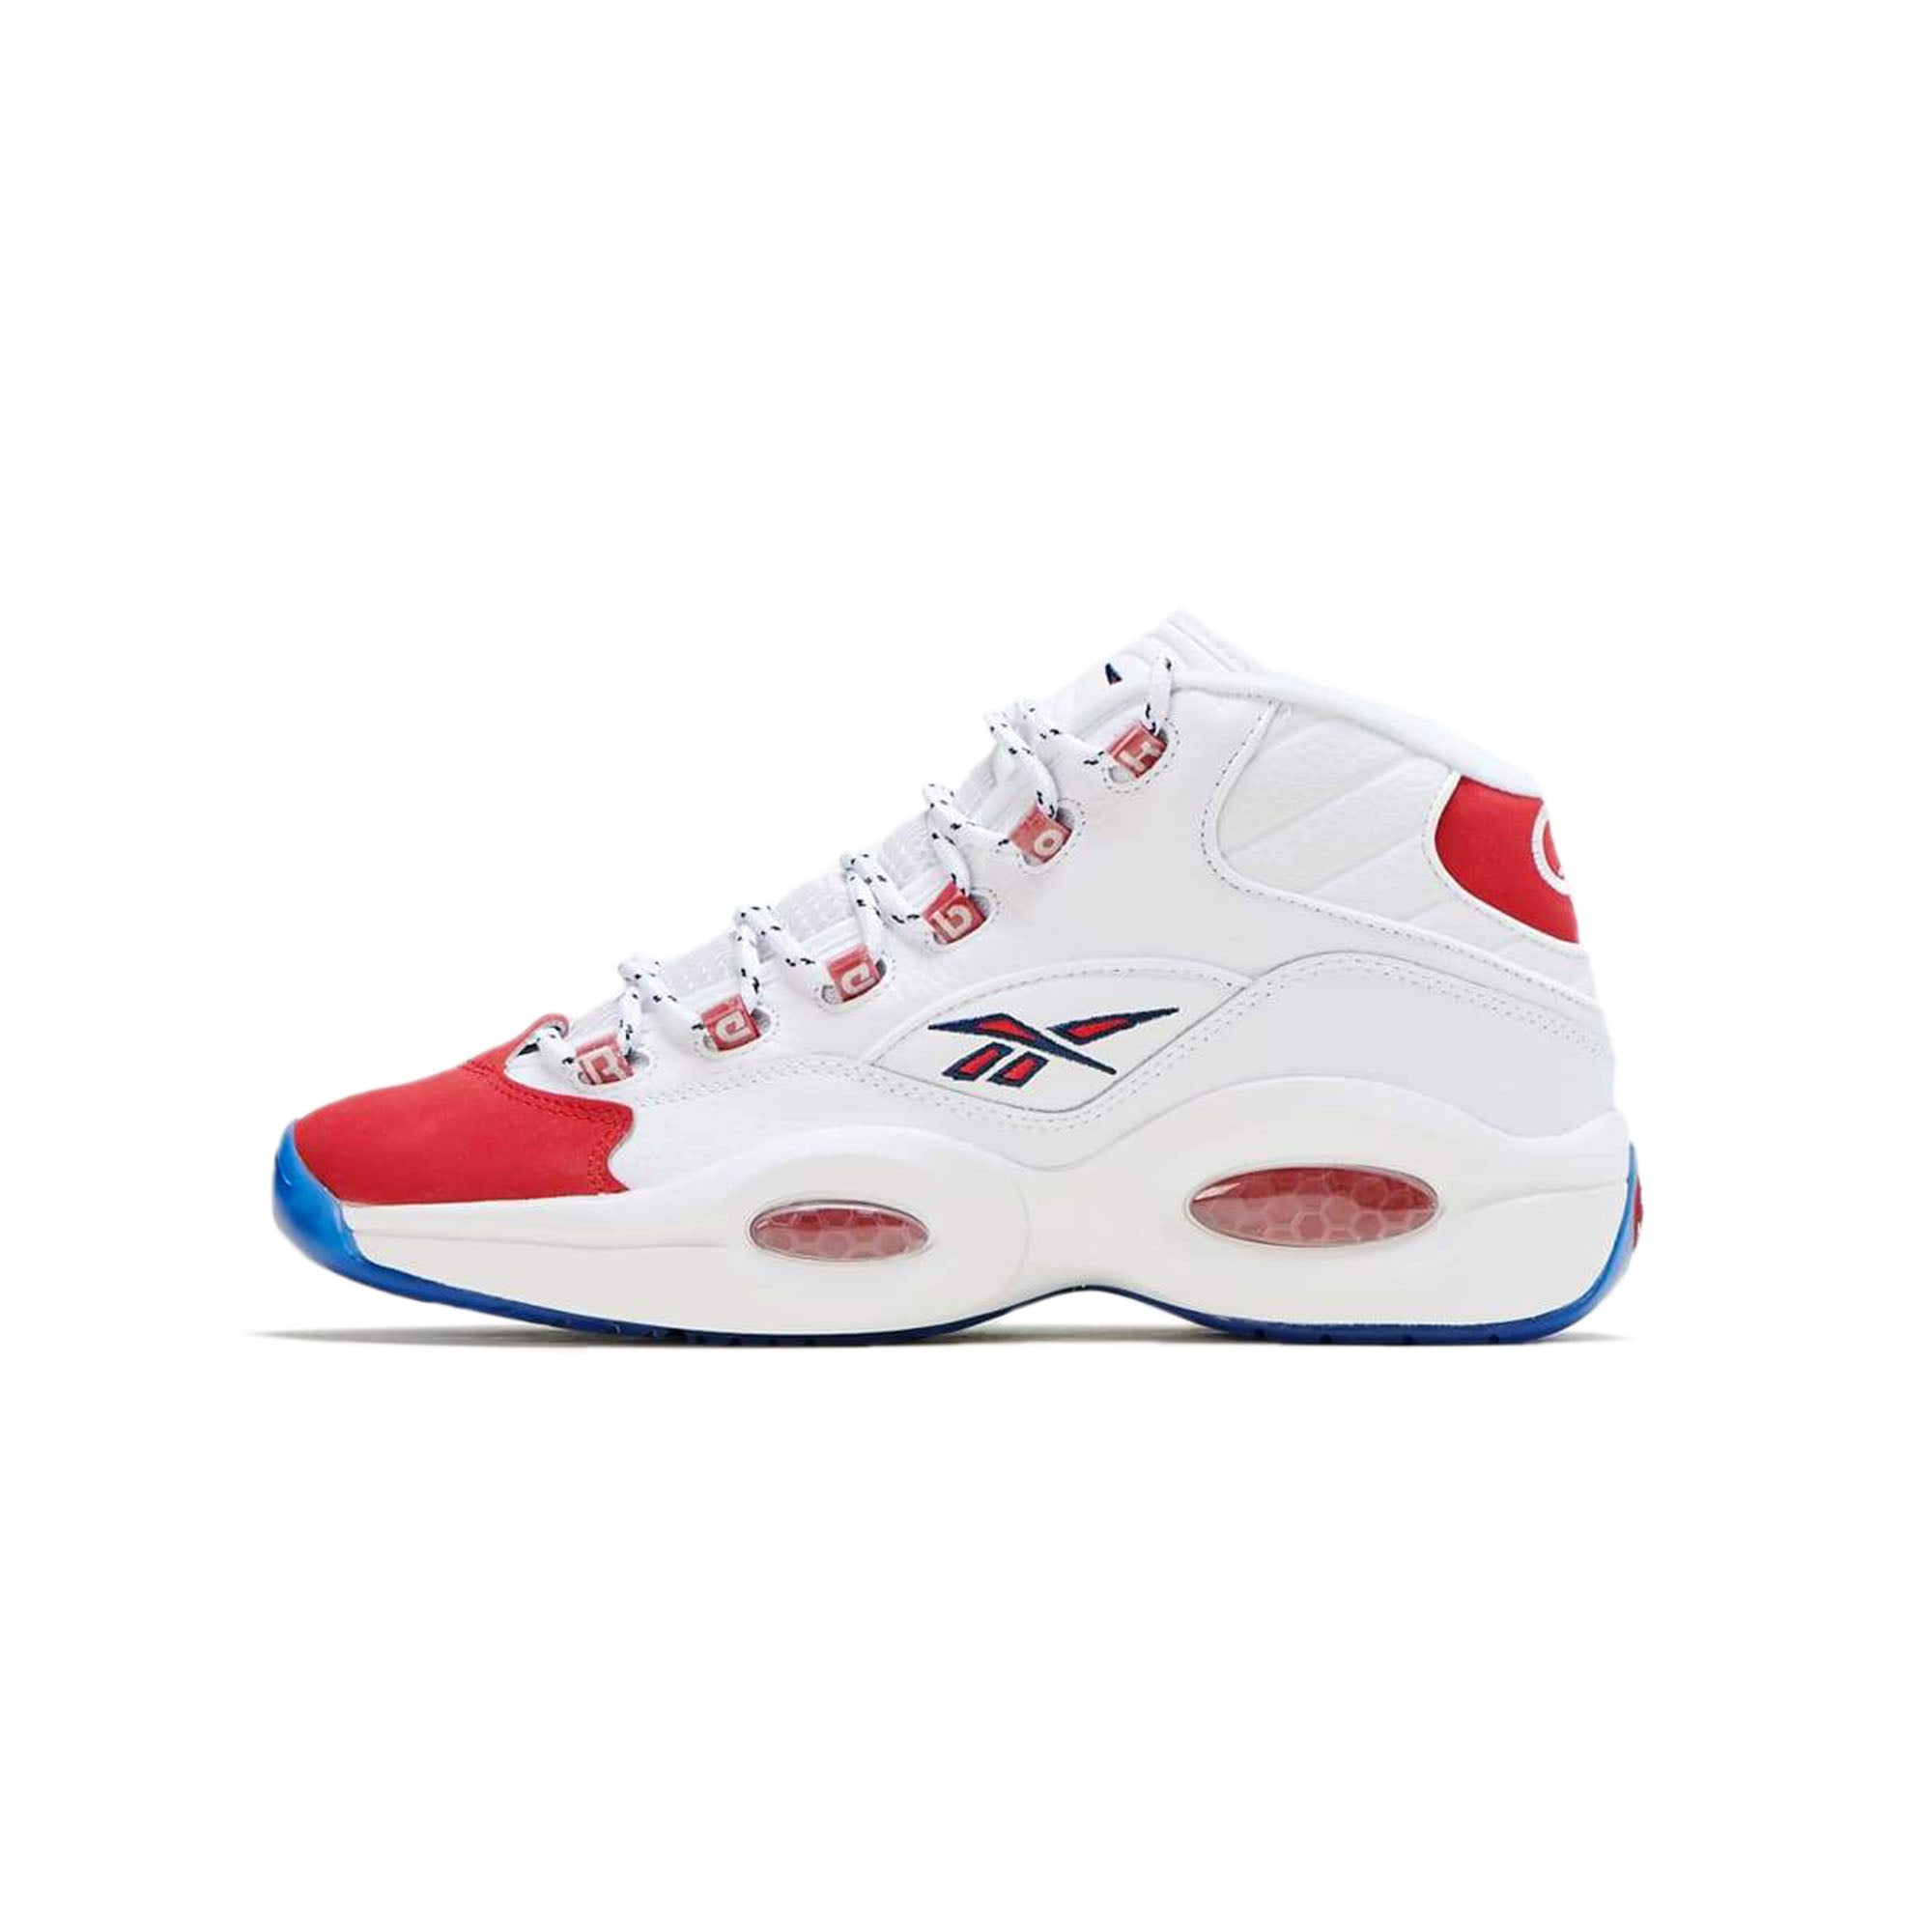 Reebok Mens Question Mid 'Red Toe' Shoes